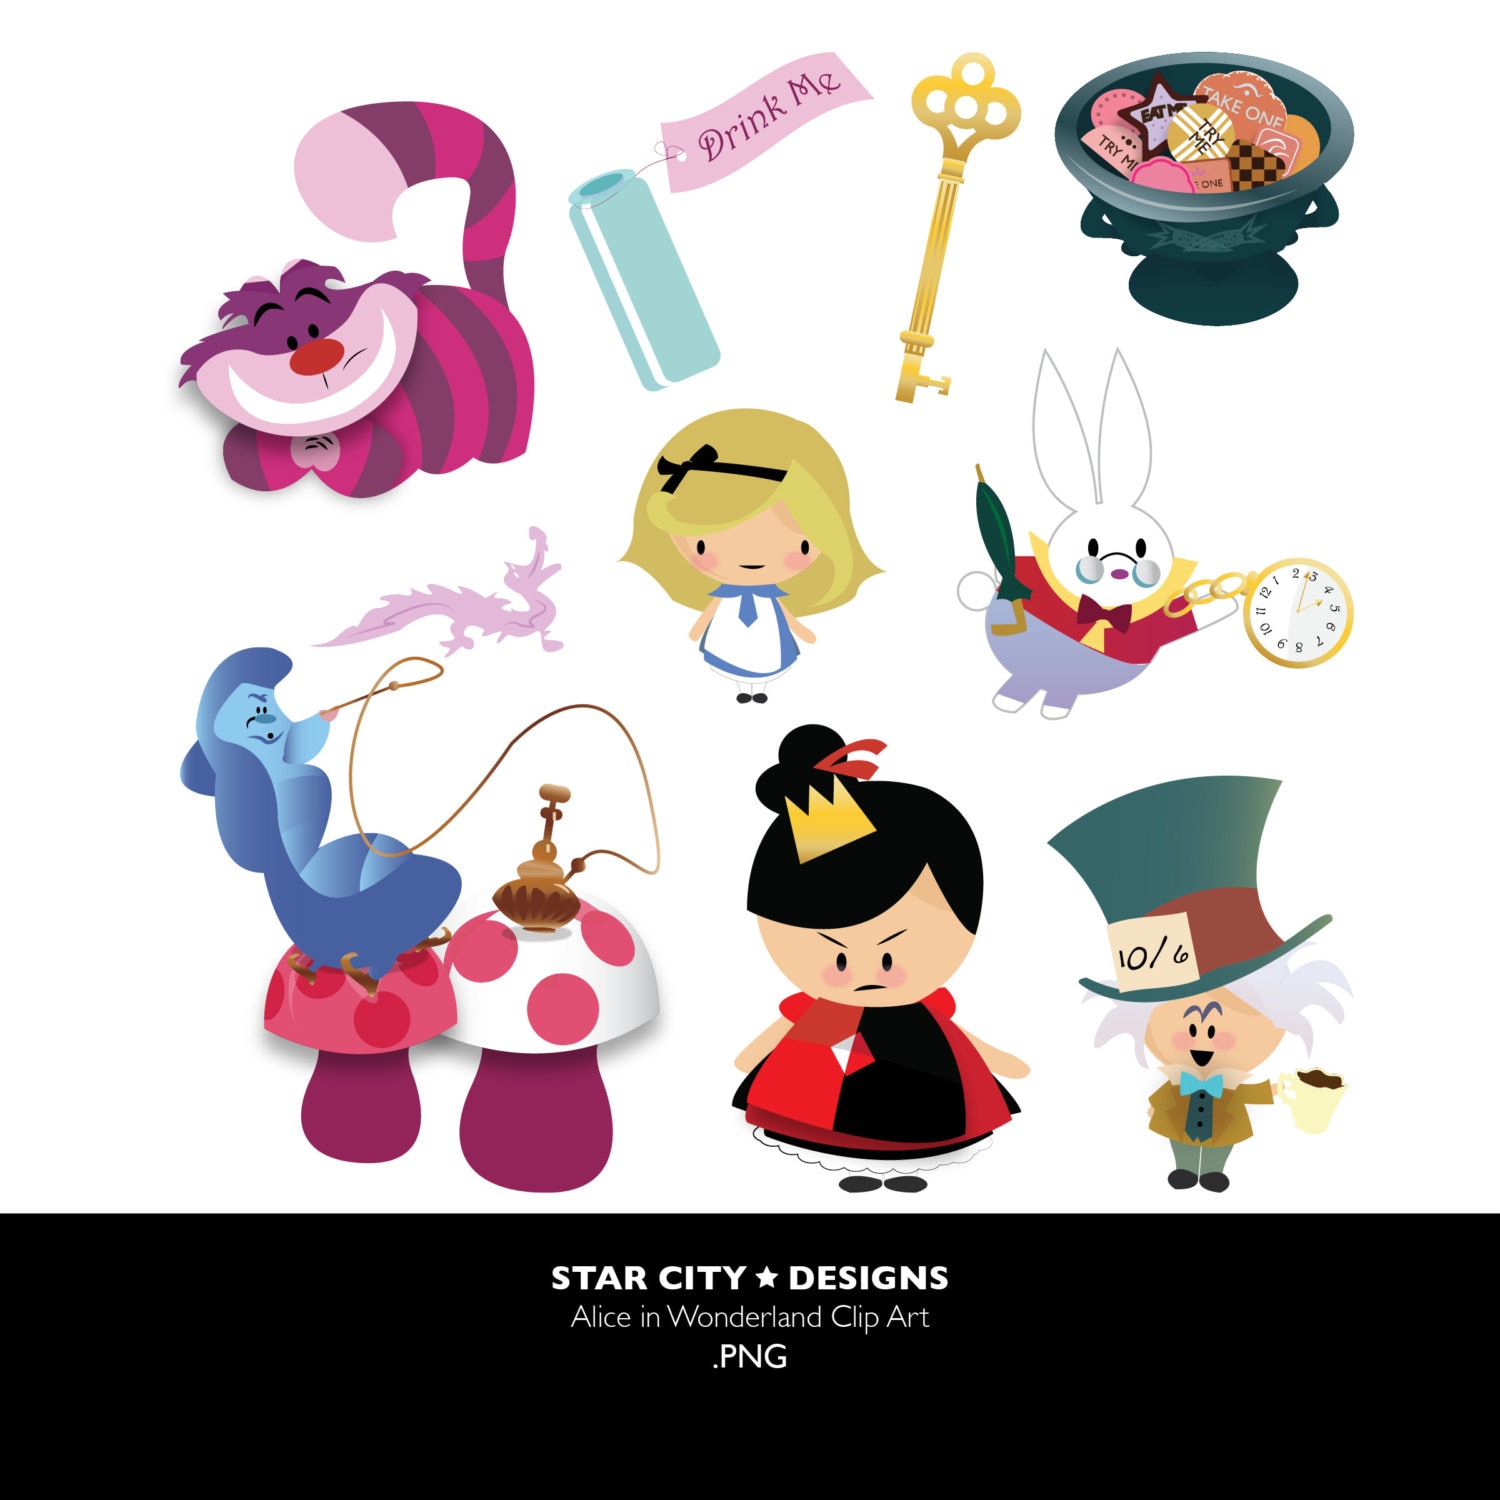 Pin by Sara T on Disney Alice in wonderland clipart